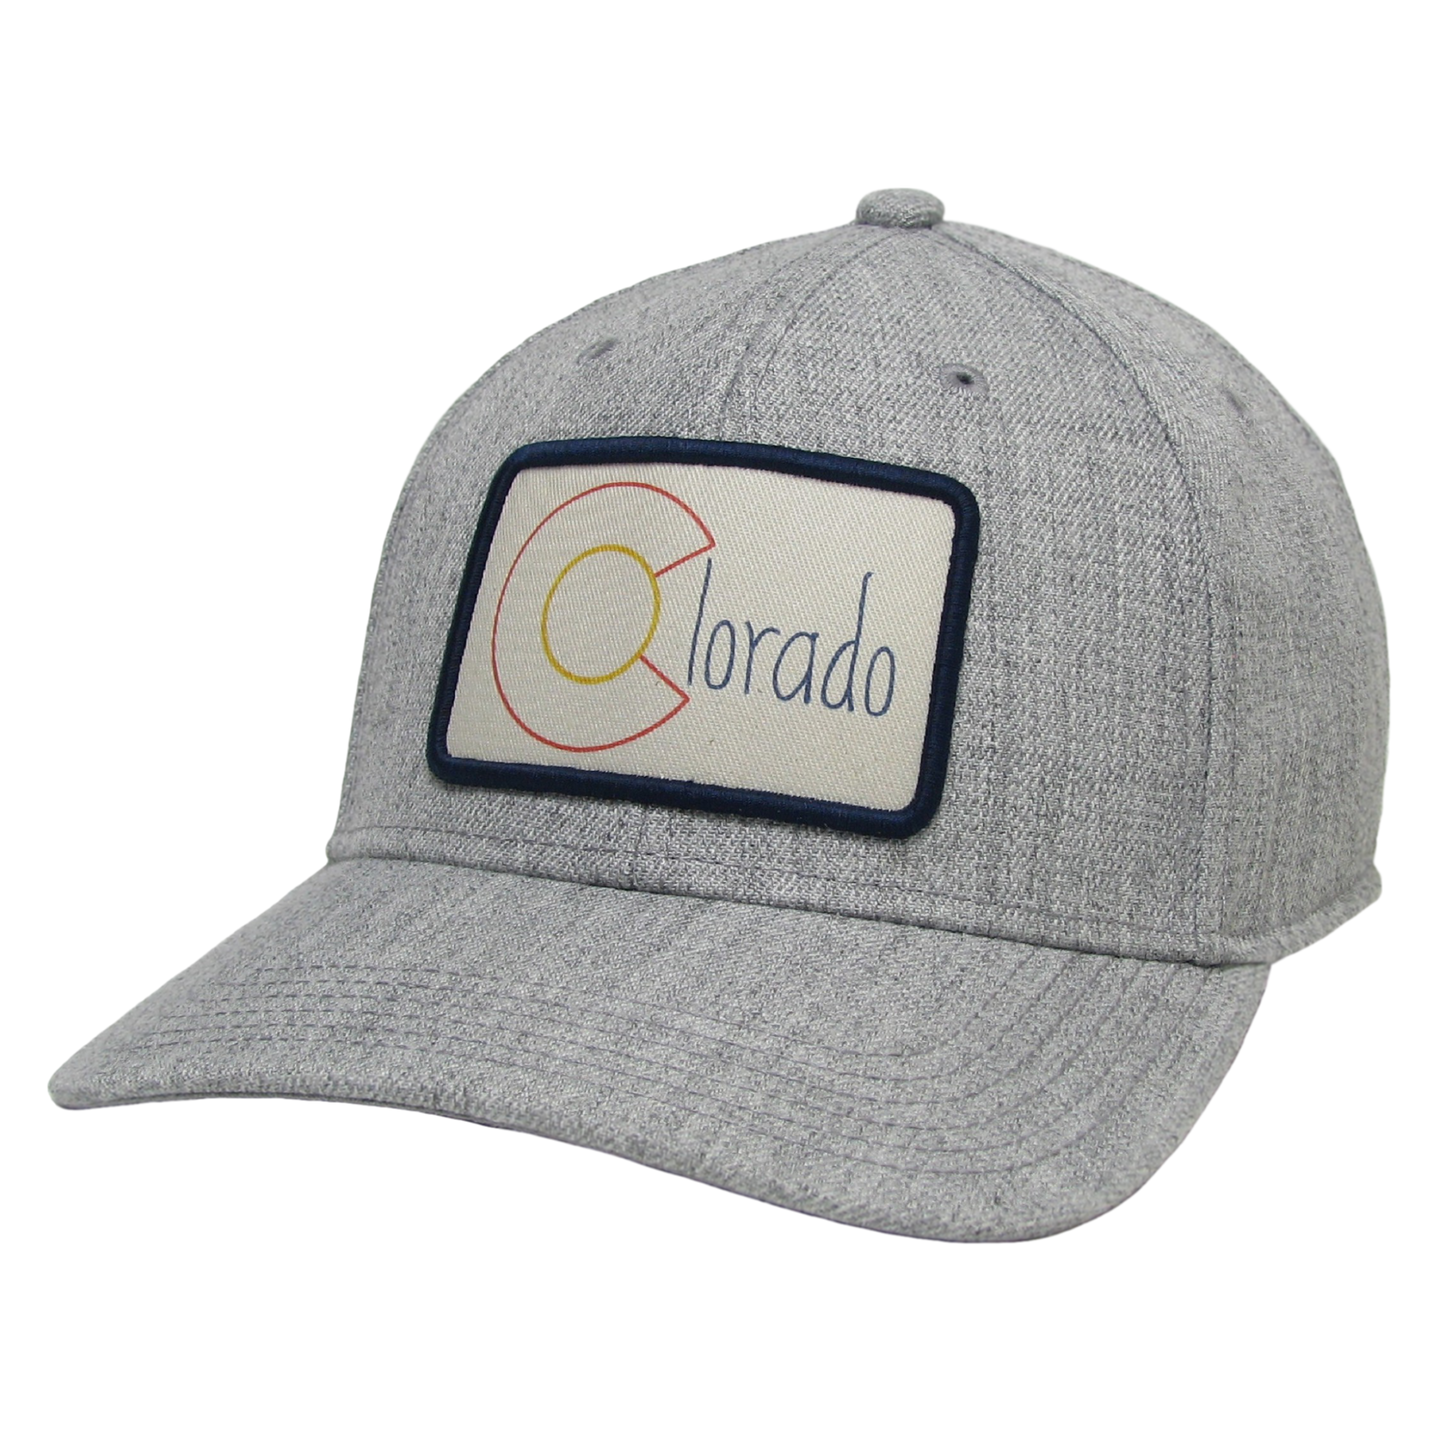 Colorado Mid-Pro Hat in Heathered Light Grey